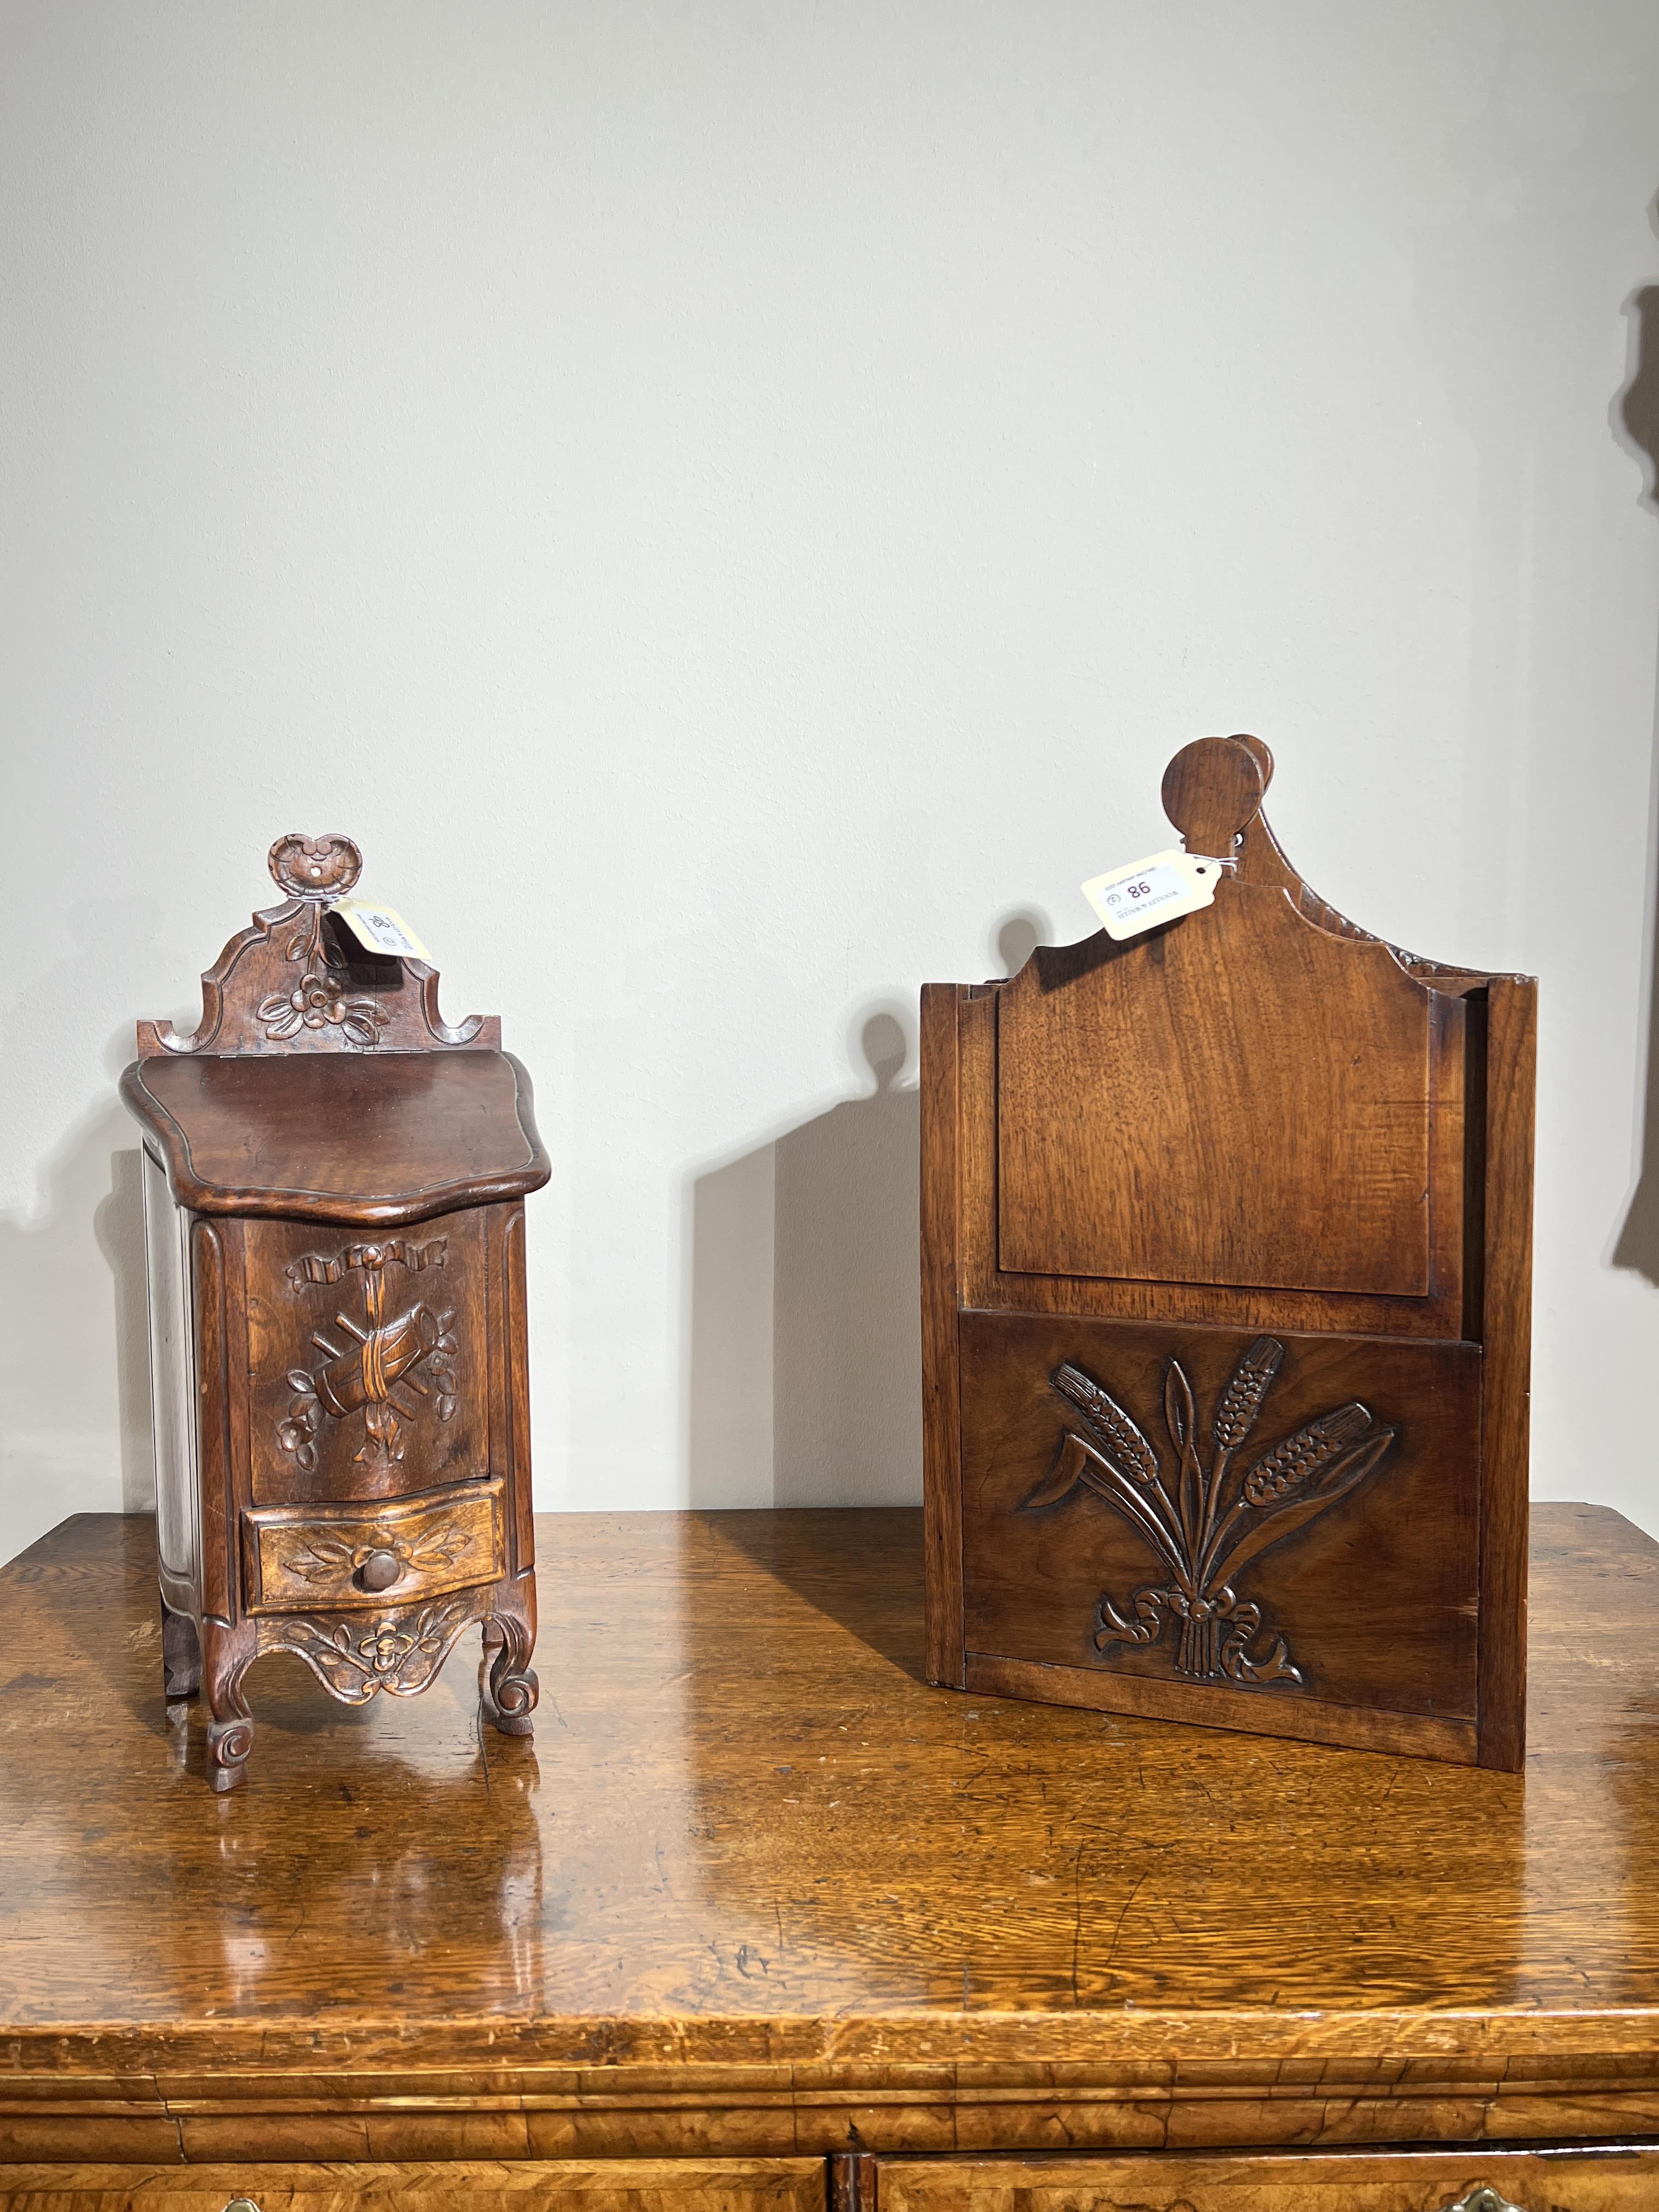 A FRENCH PROVINCIAL WALNUT CANDLE BOX LATE 18TH / EARLY 19TH CENTURYwith a sliding cover and - Image 18 of 18